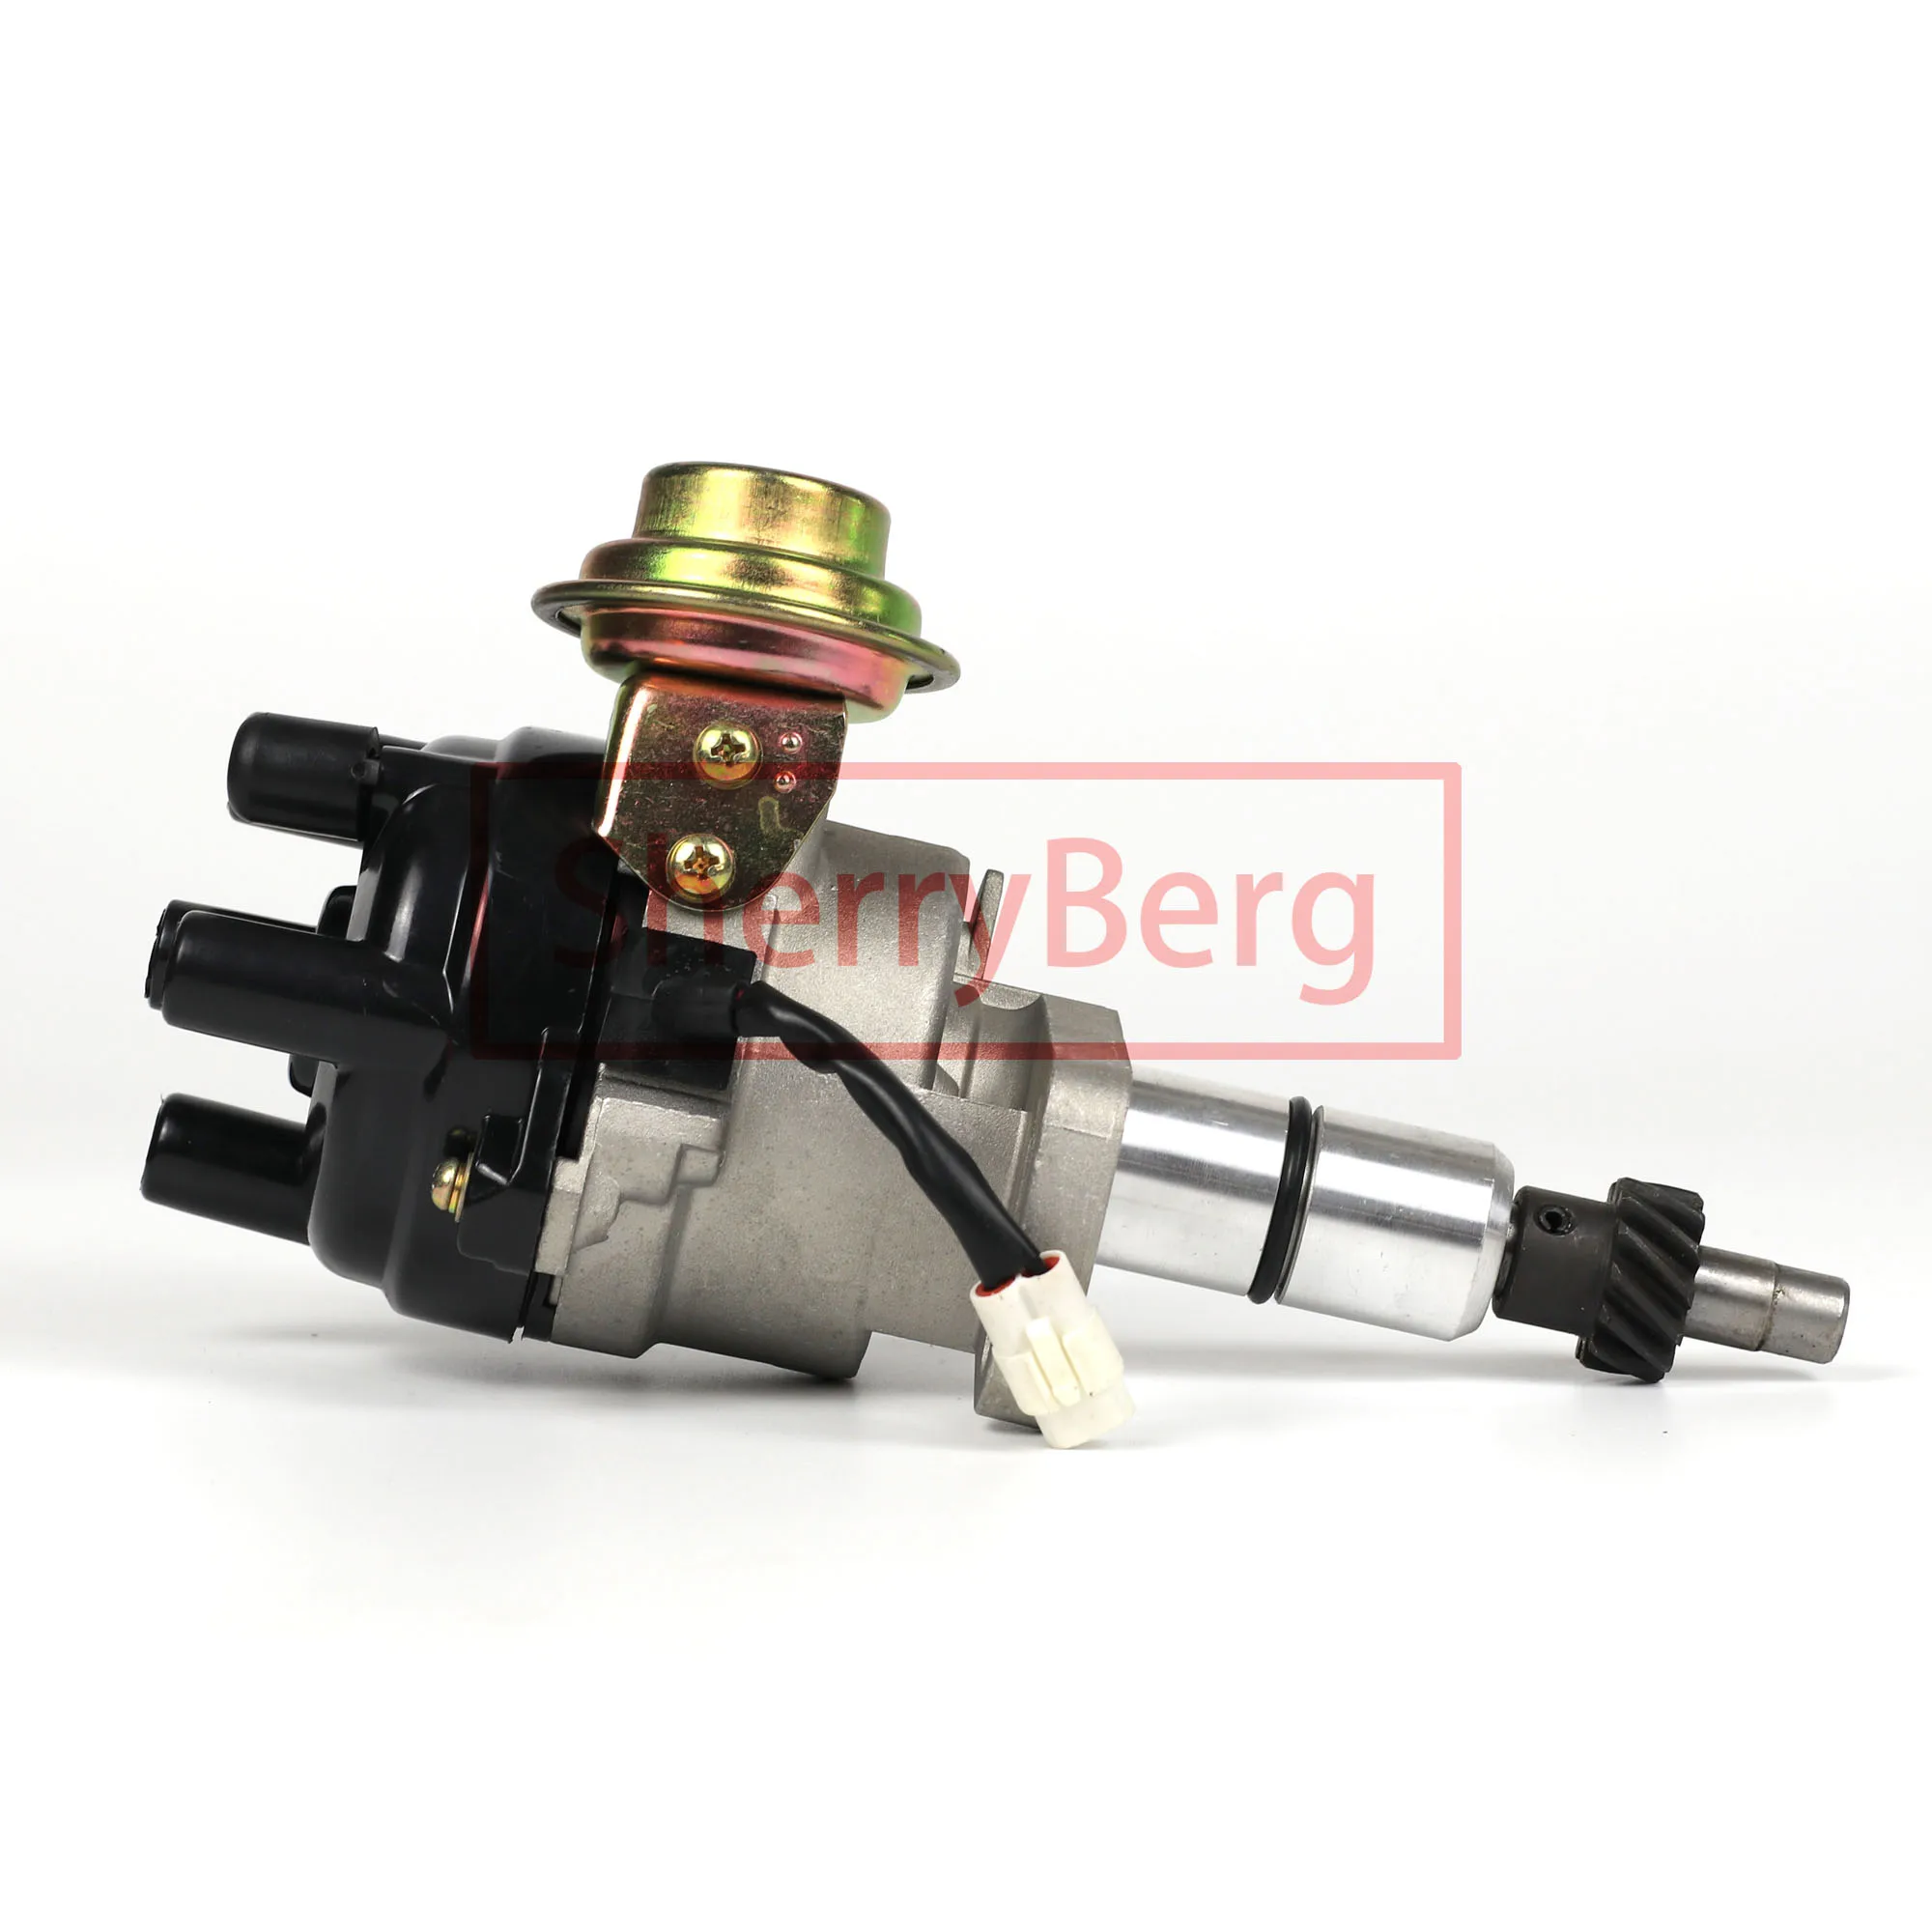 

SherryBerg new complete ignition Distributor fit for Daewoo OE 94582693 T2782875 271000250 for DAMAS 3 cylinders top quality